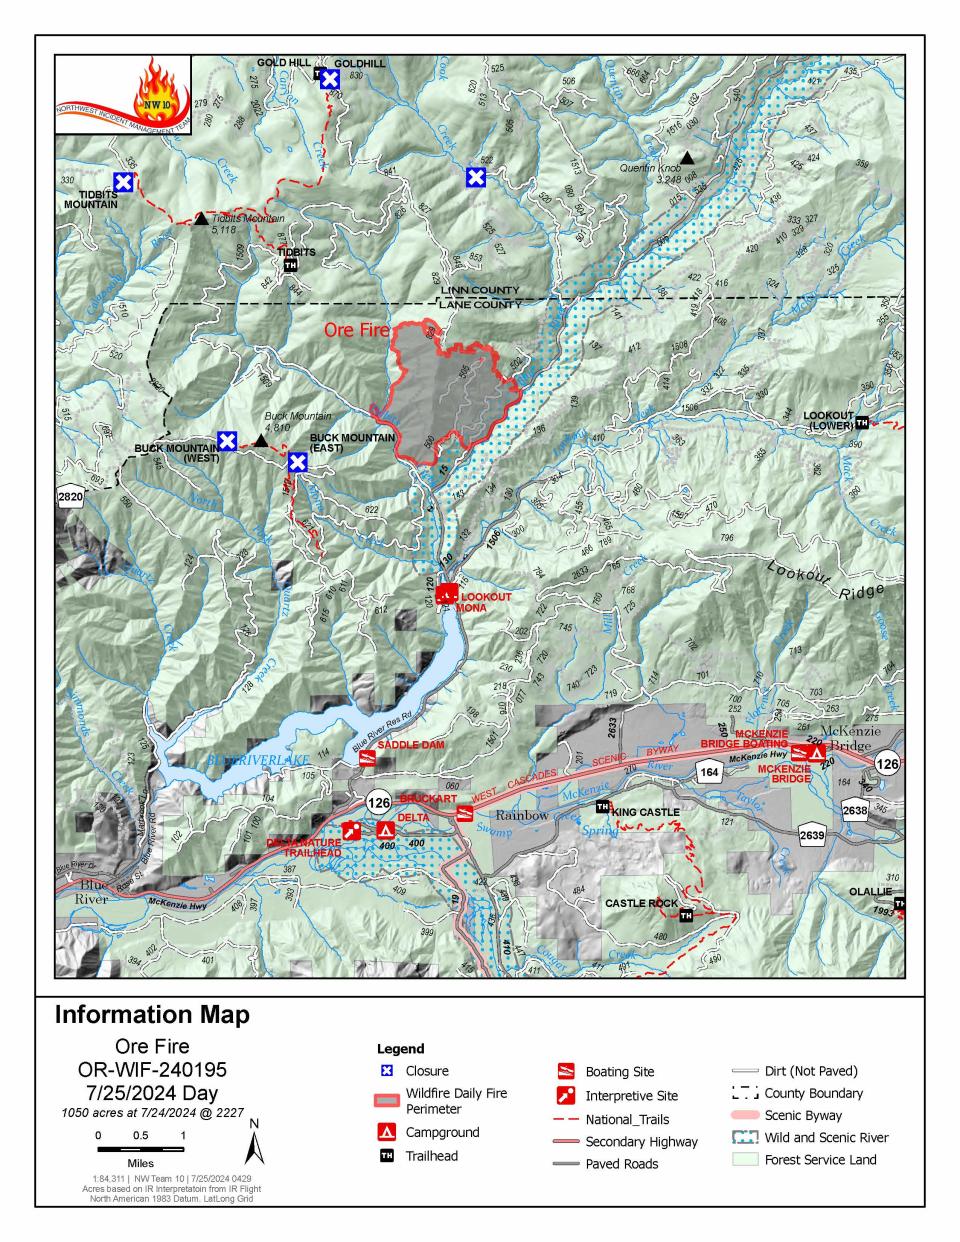 Ore Fire information map.